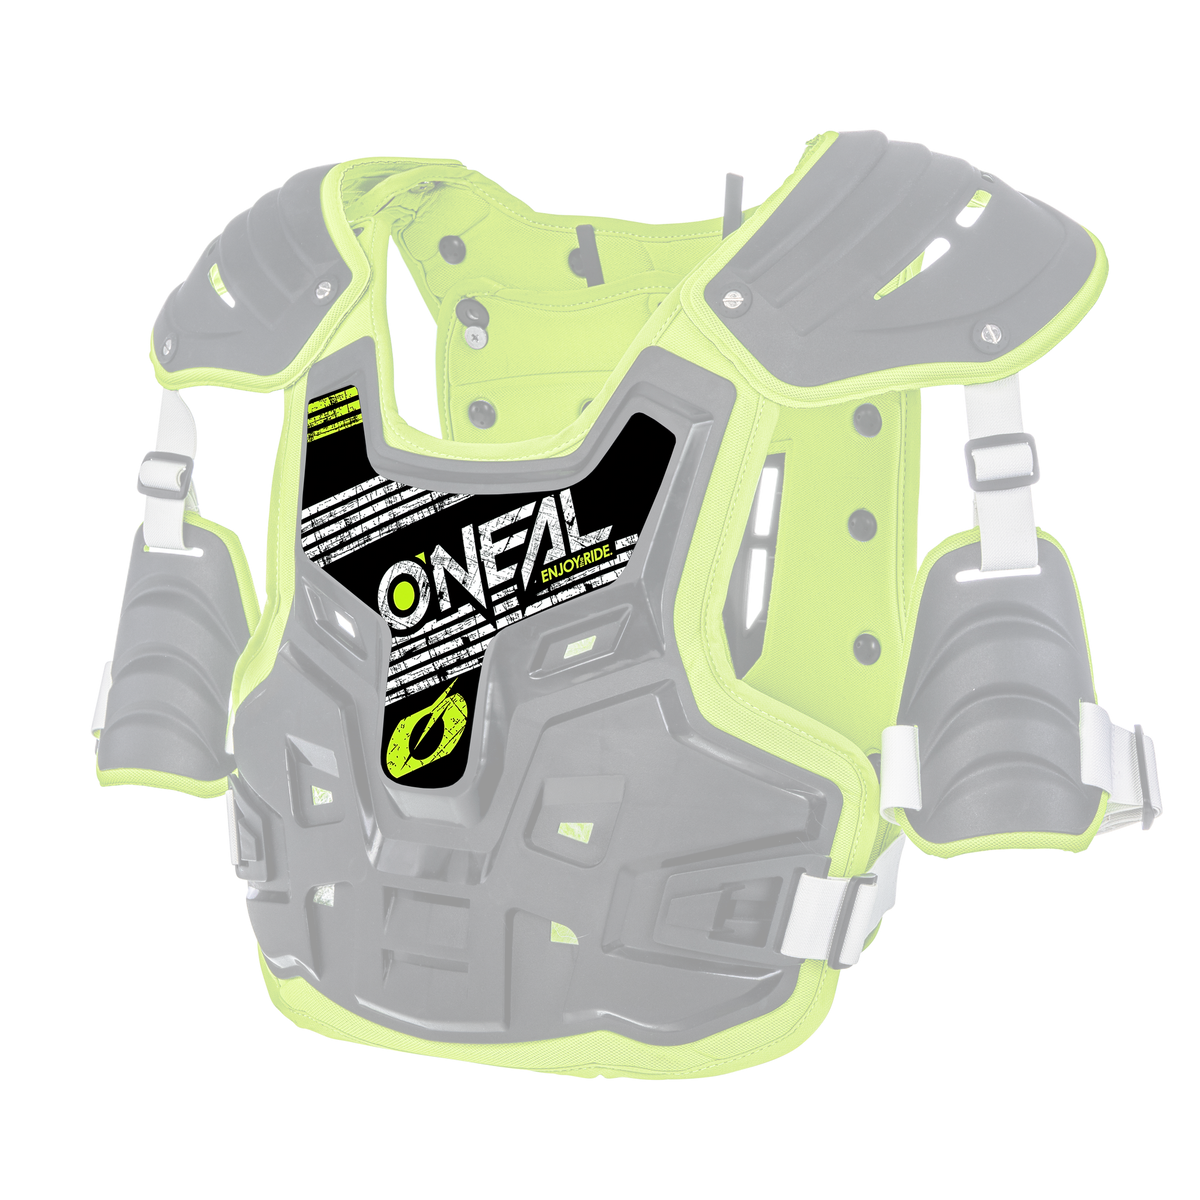 https://cdn.oneal.eu/assets/importedProductImages/PROTECTION/BODY%20ARMOUR/PXR%20STONE%20SHIELD/black_neon%20yellow/2018_ONeal_PXR_StoneShield_black_neon%20yellow_Sticker.png